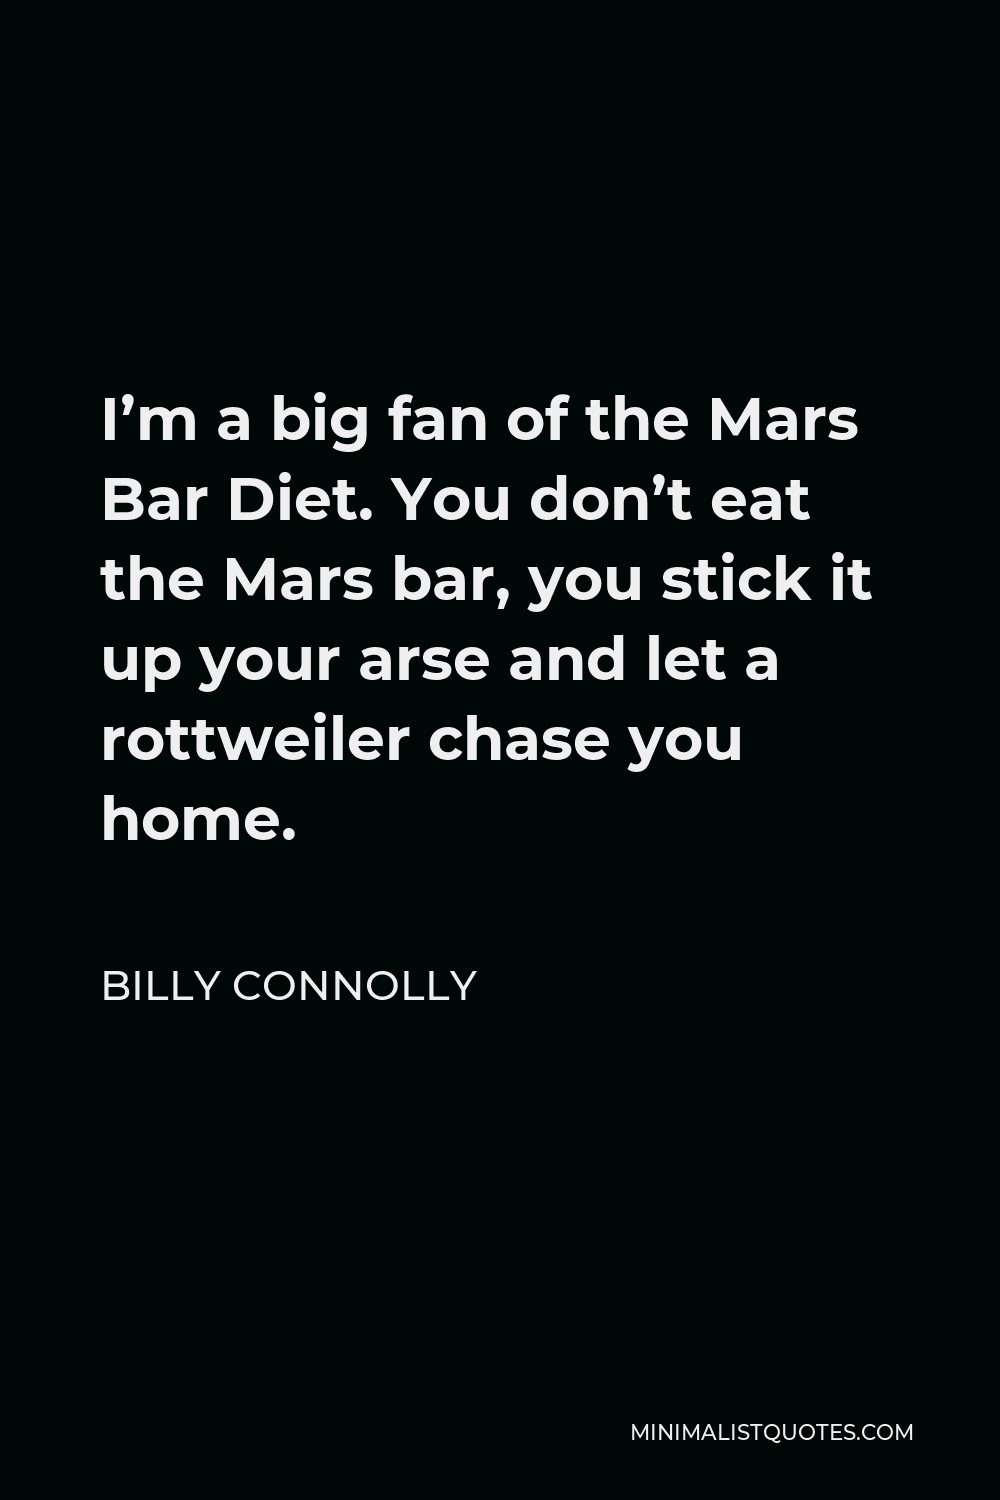 Billy Connolly Quote - I’m a big fan of the Mars Bar Diet. You don’t eat the Mars bar, you stick it up your arse and let a rottweiler chase you home.